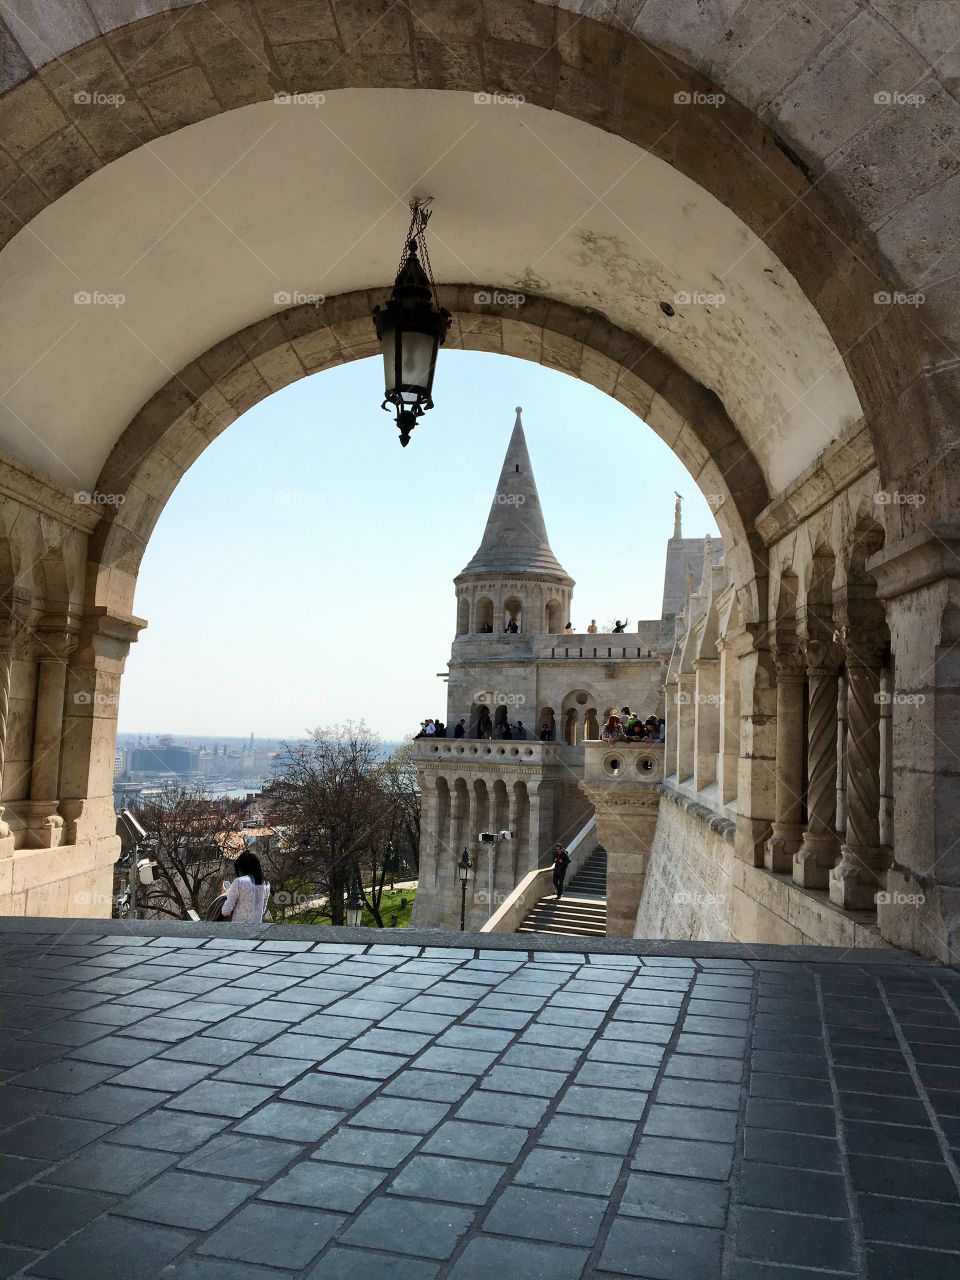 Arch castle, Budapest Hungaria